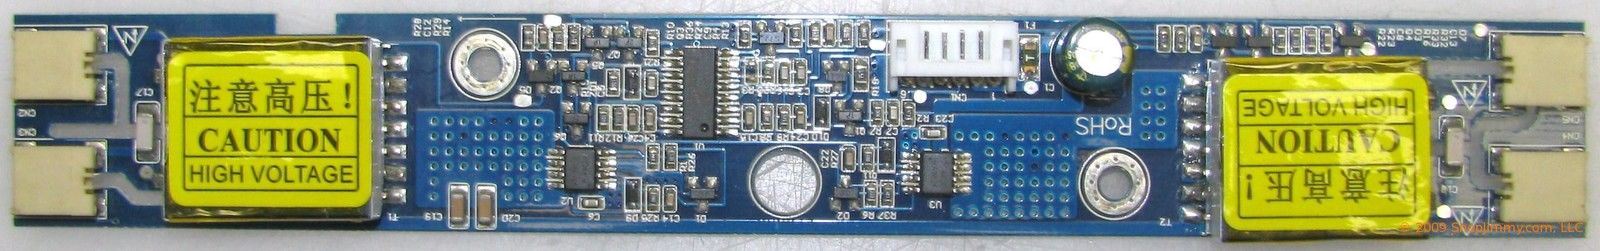 FLY-IV190418 FLY-IV190418 Backlight Inverter tested - Click Image to Close